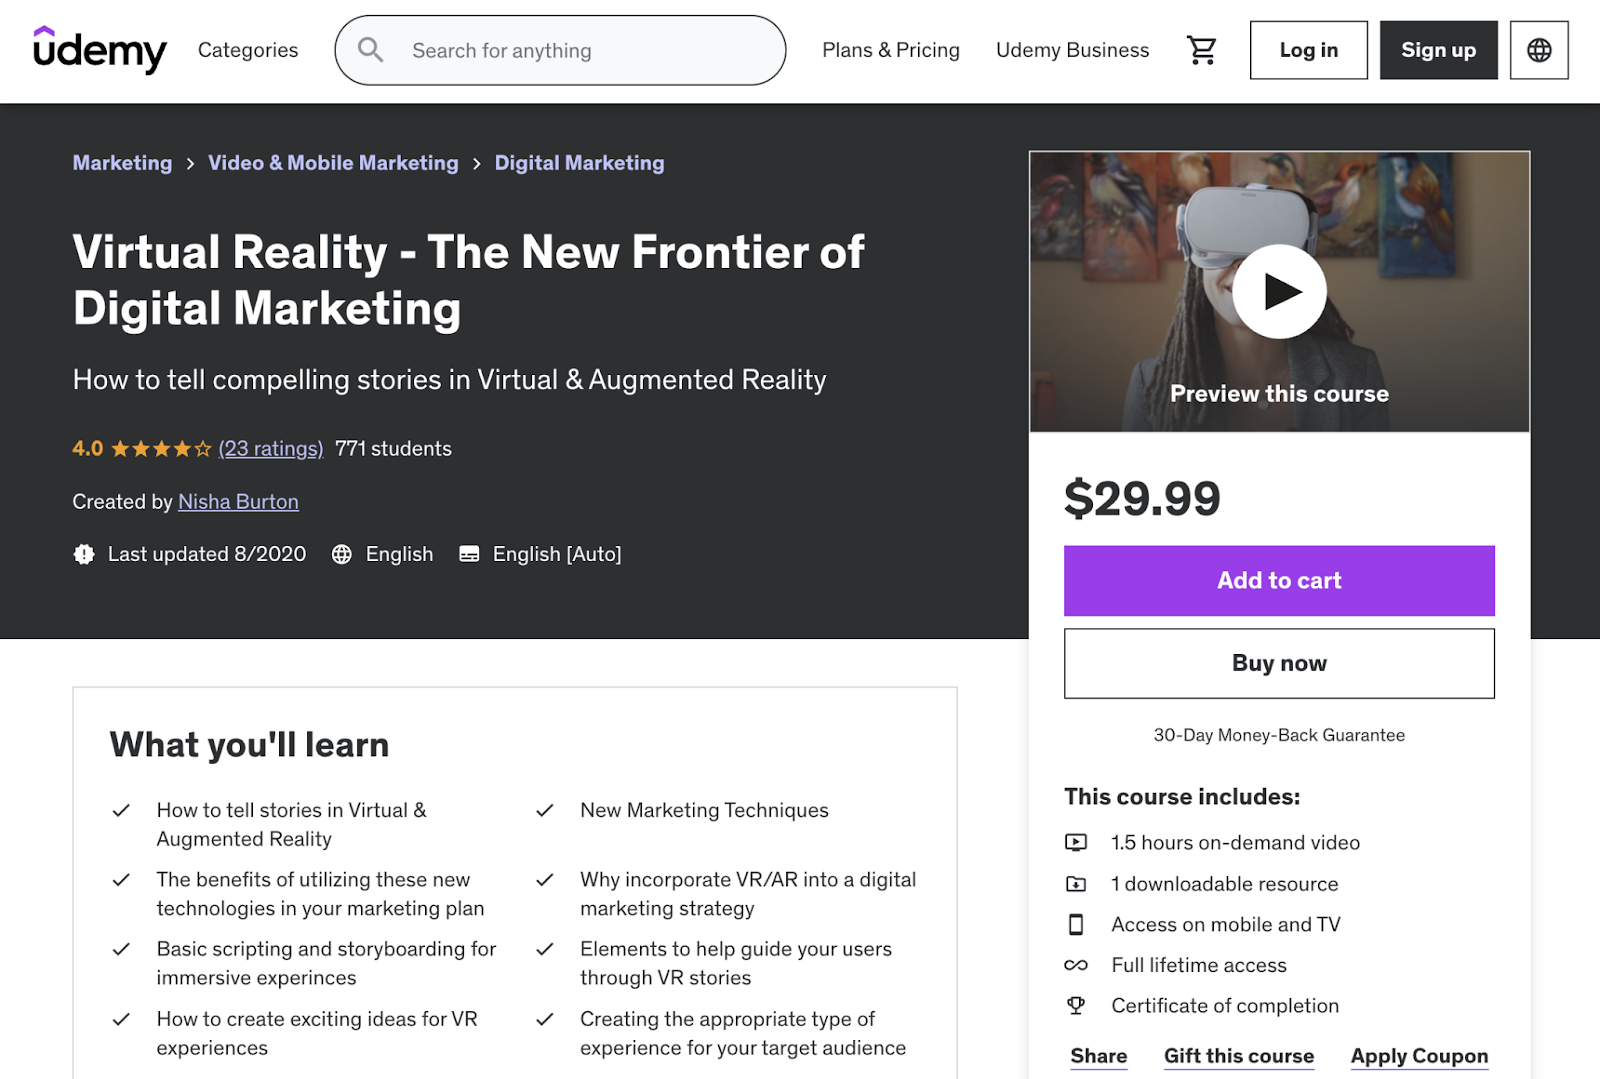 Virtual Reality – The New Frontier of Digital Marketing course